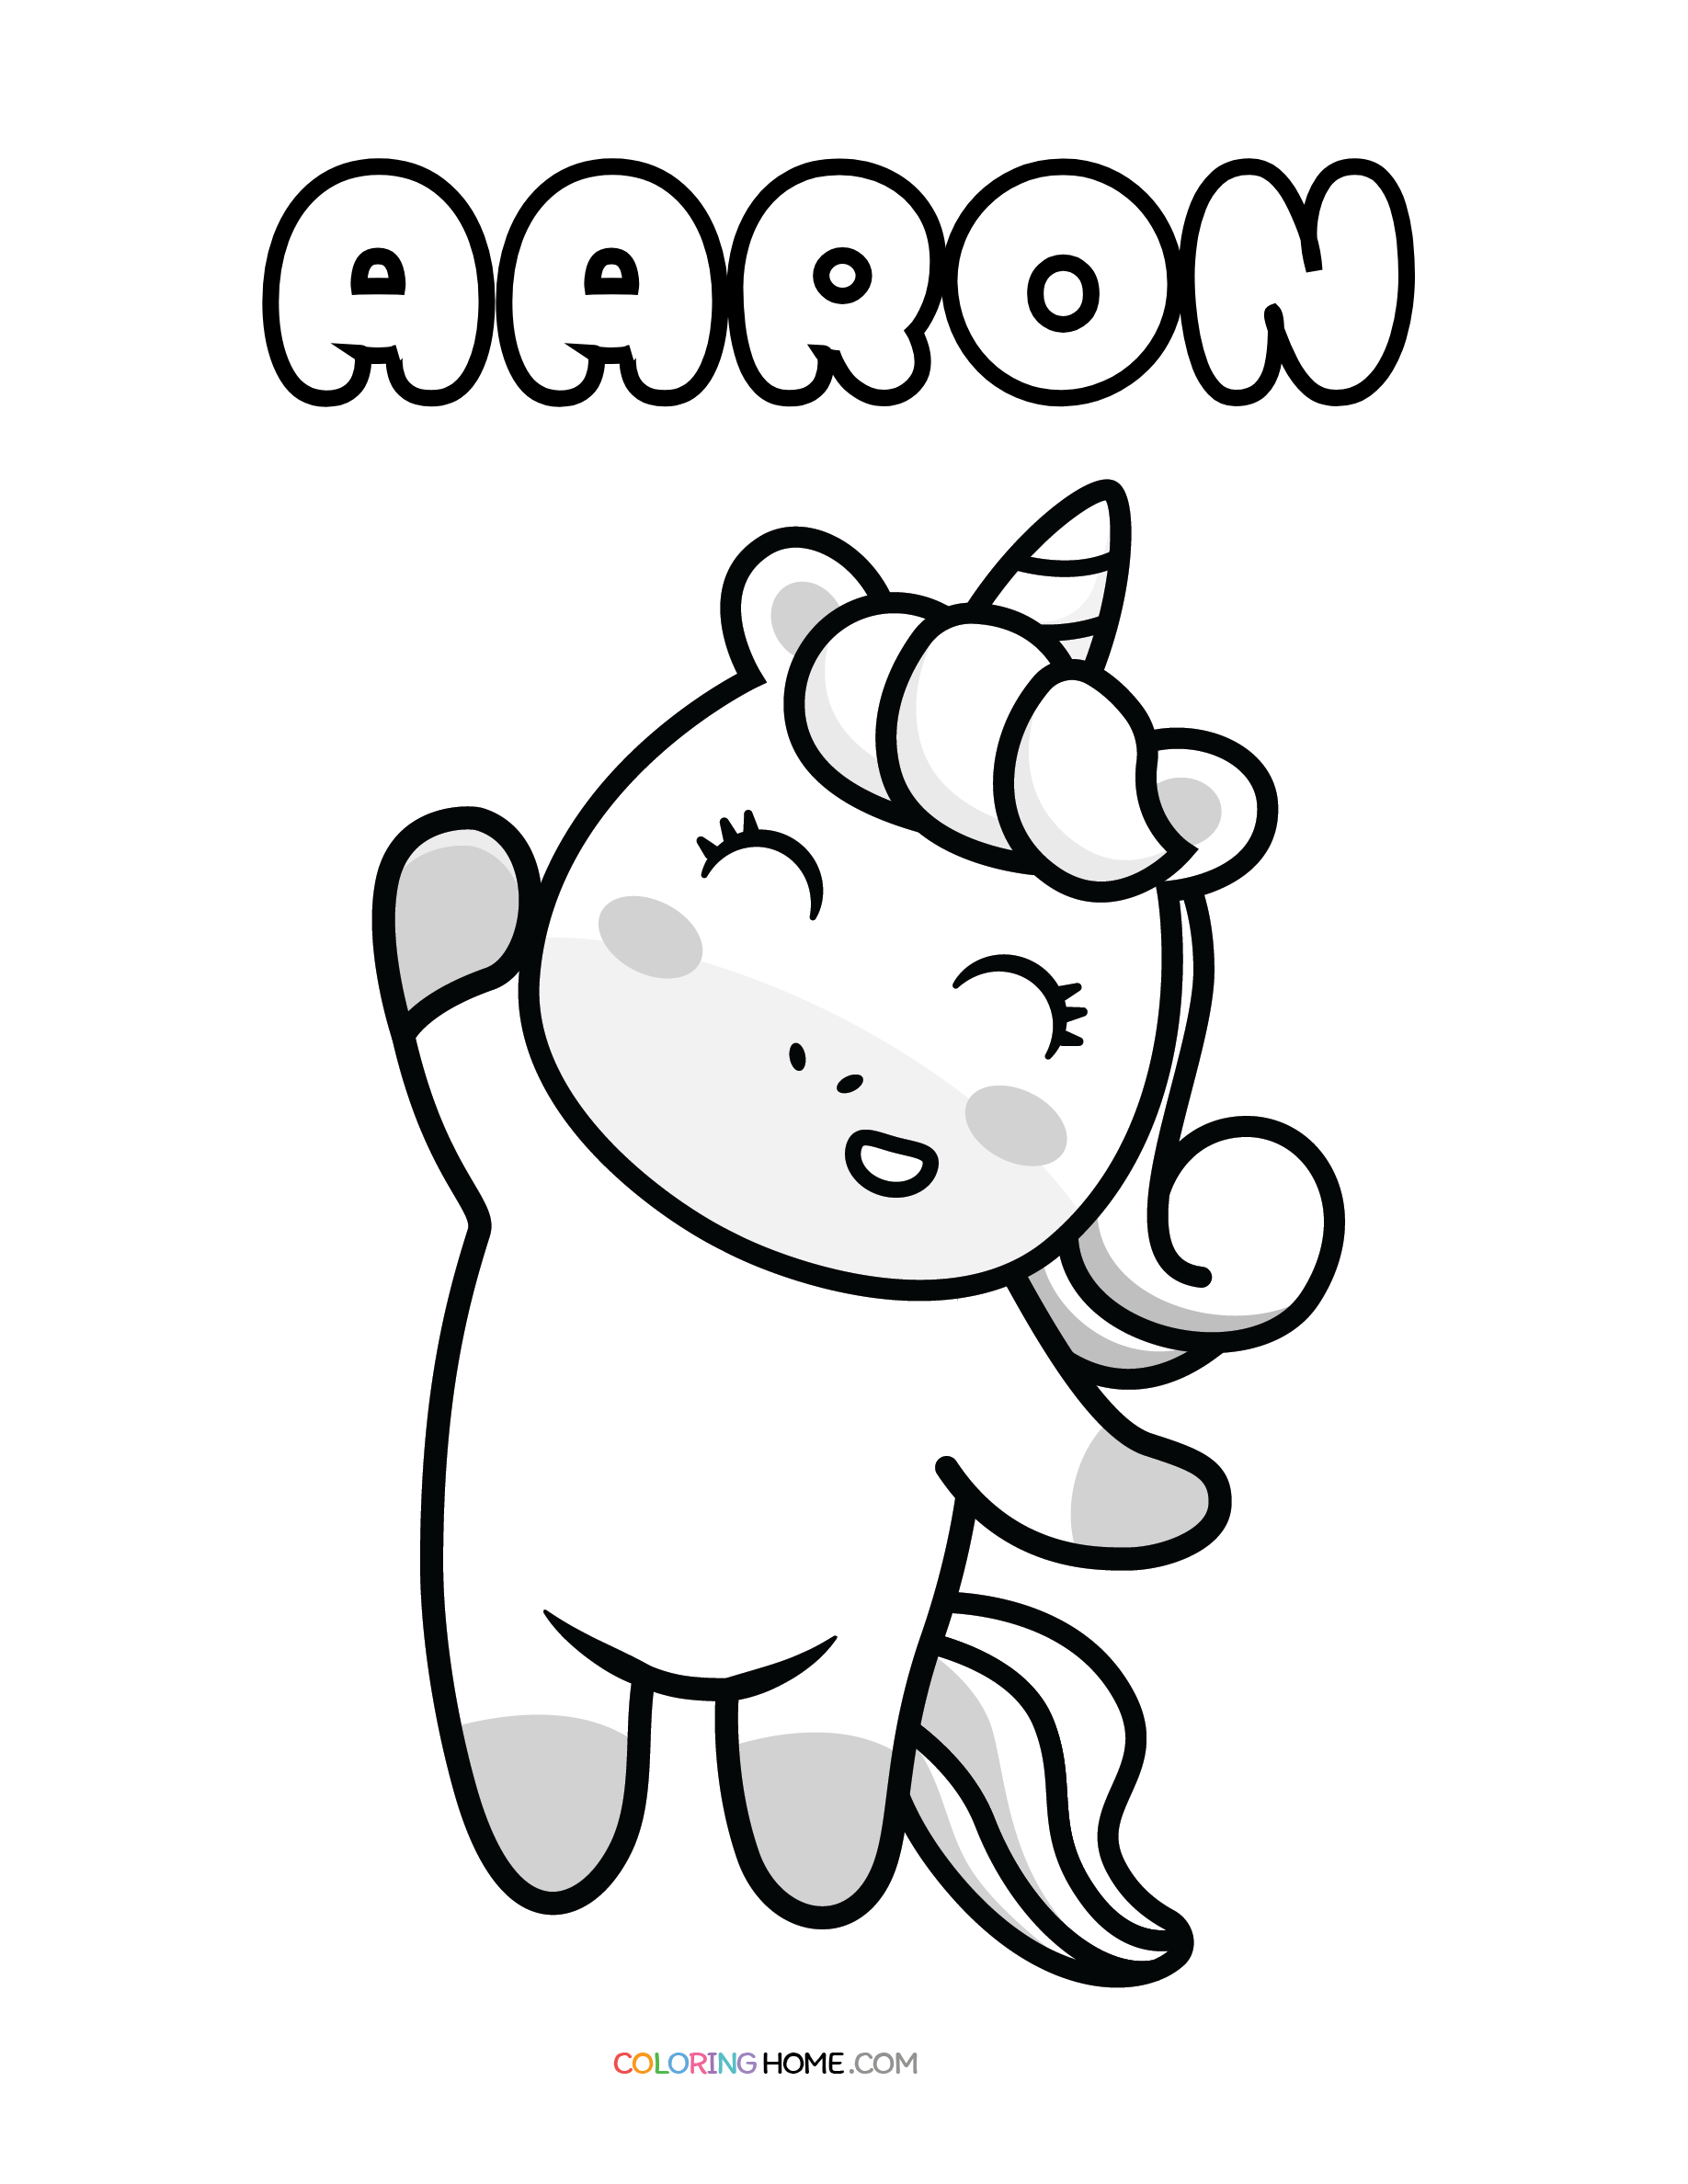 Aaron unicorn coloring page